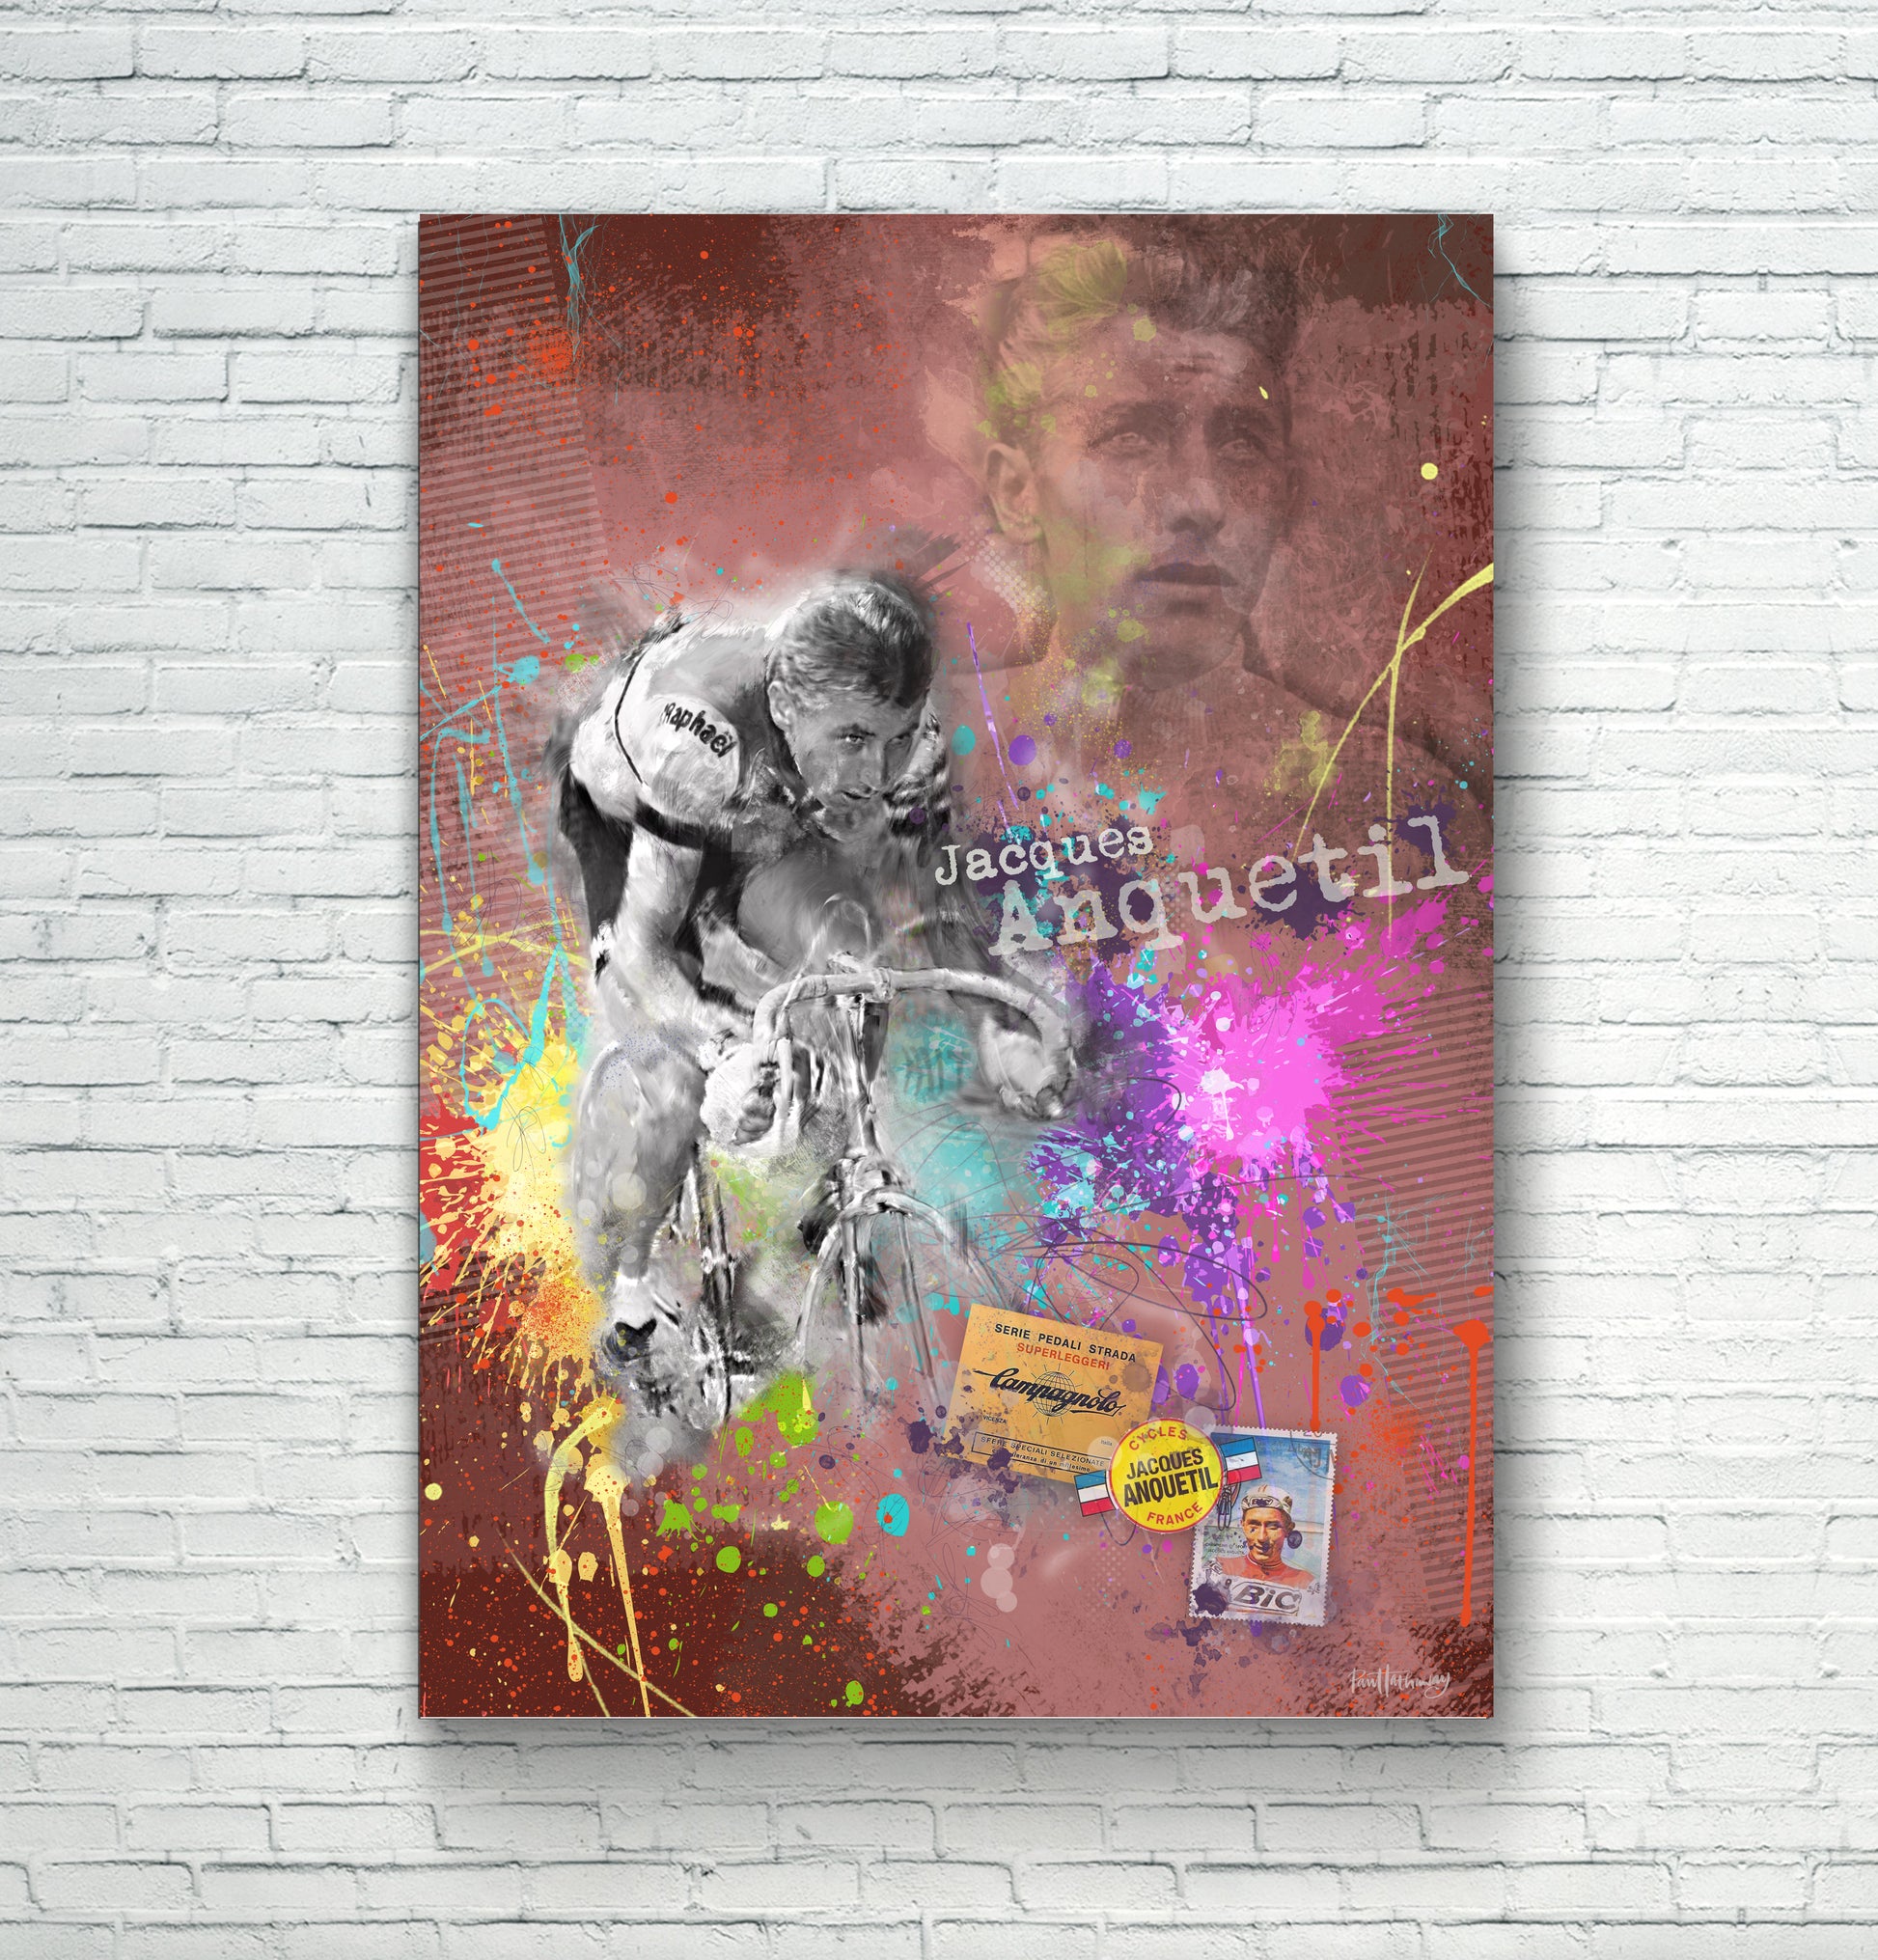 jaques anquetil, cycling poster